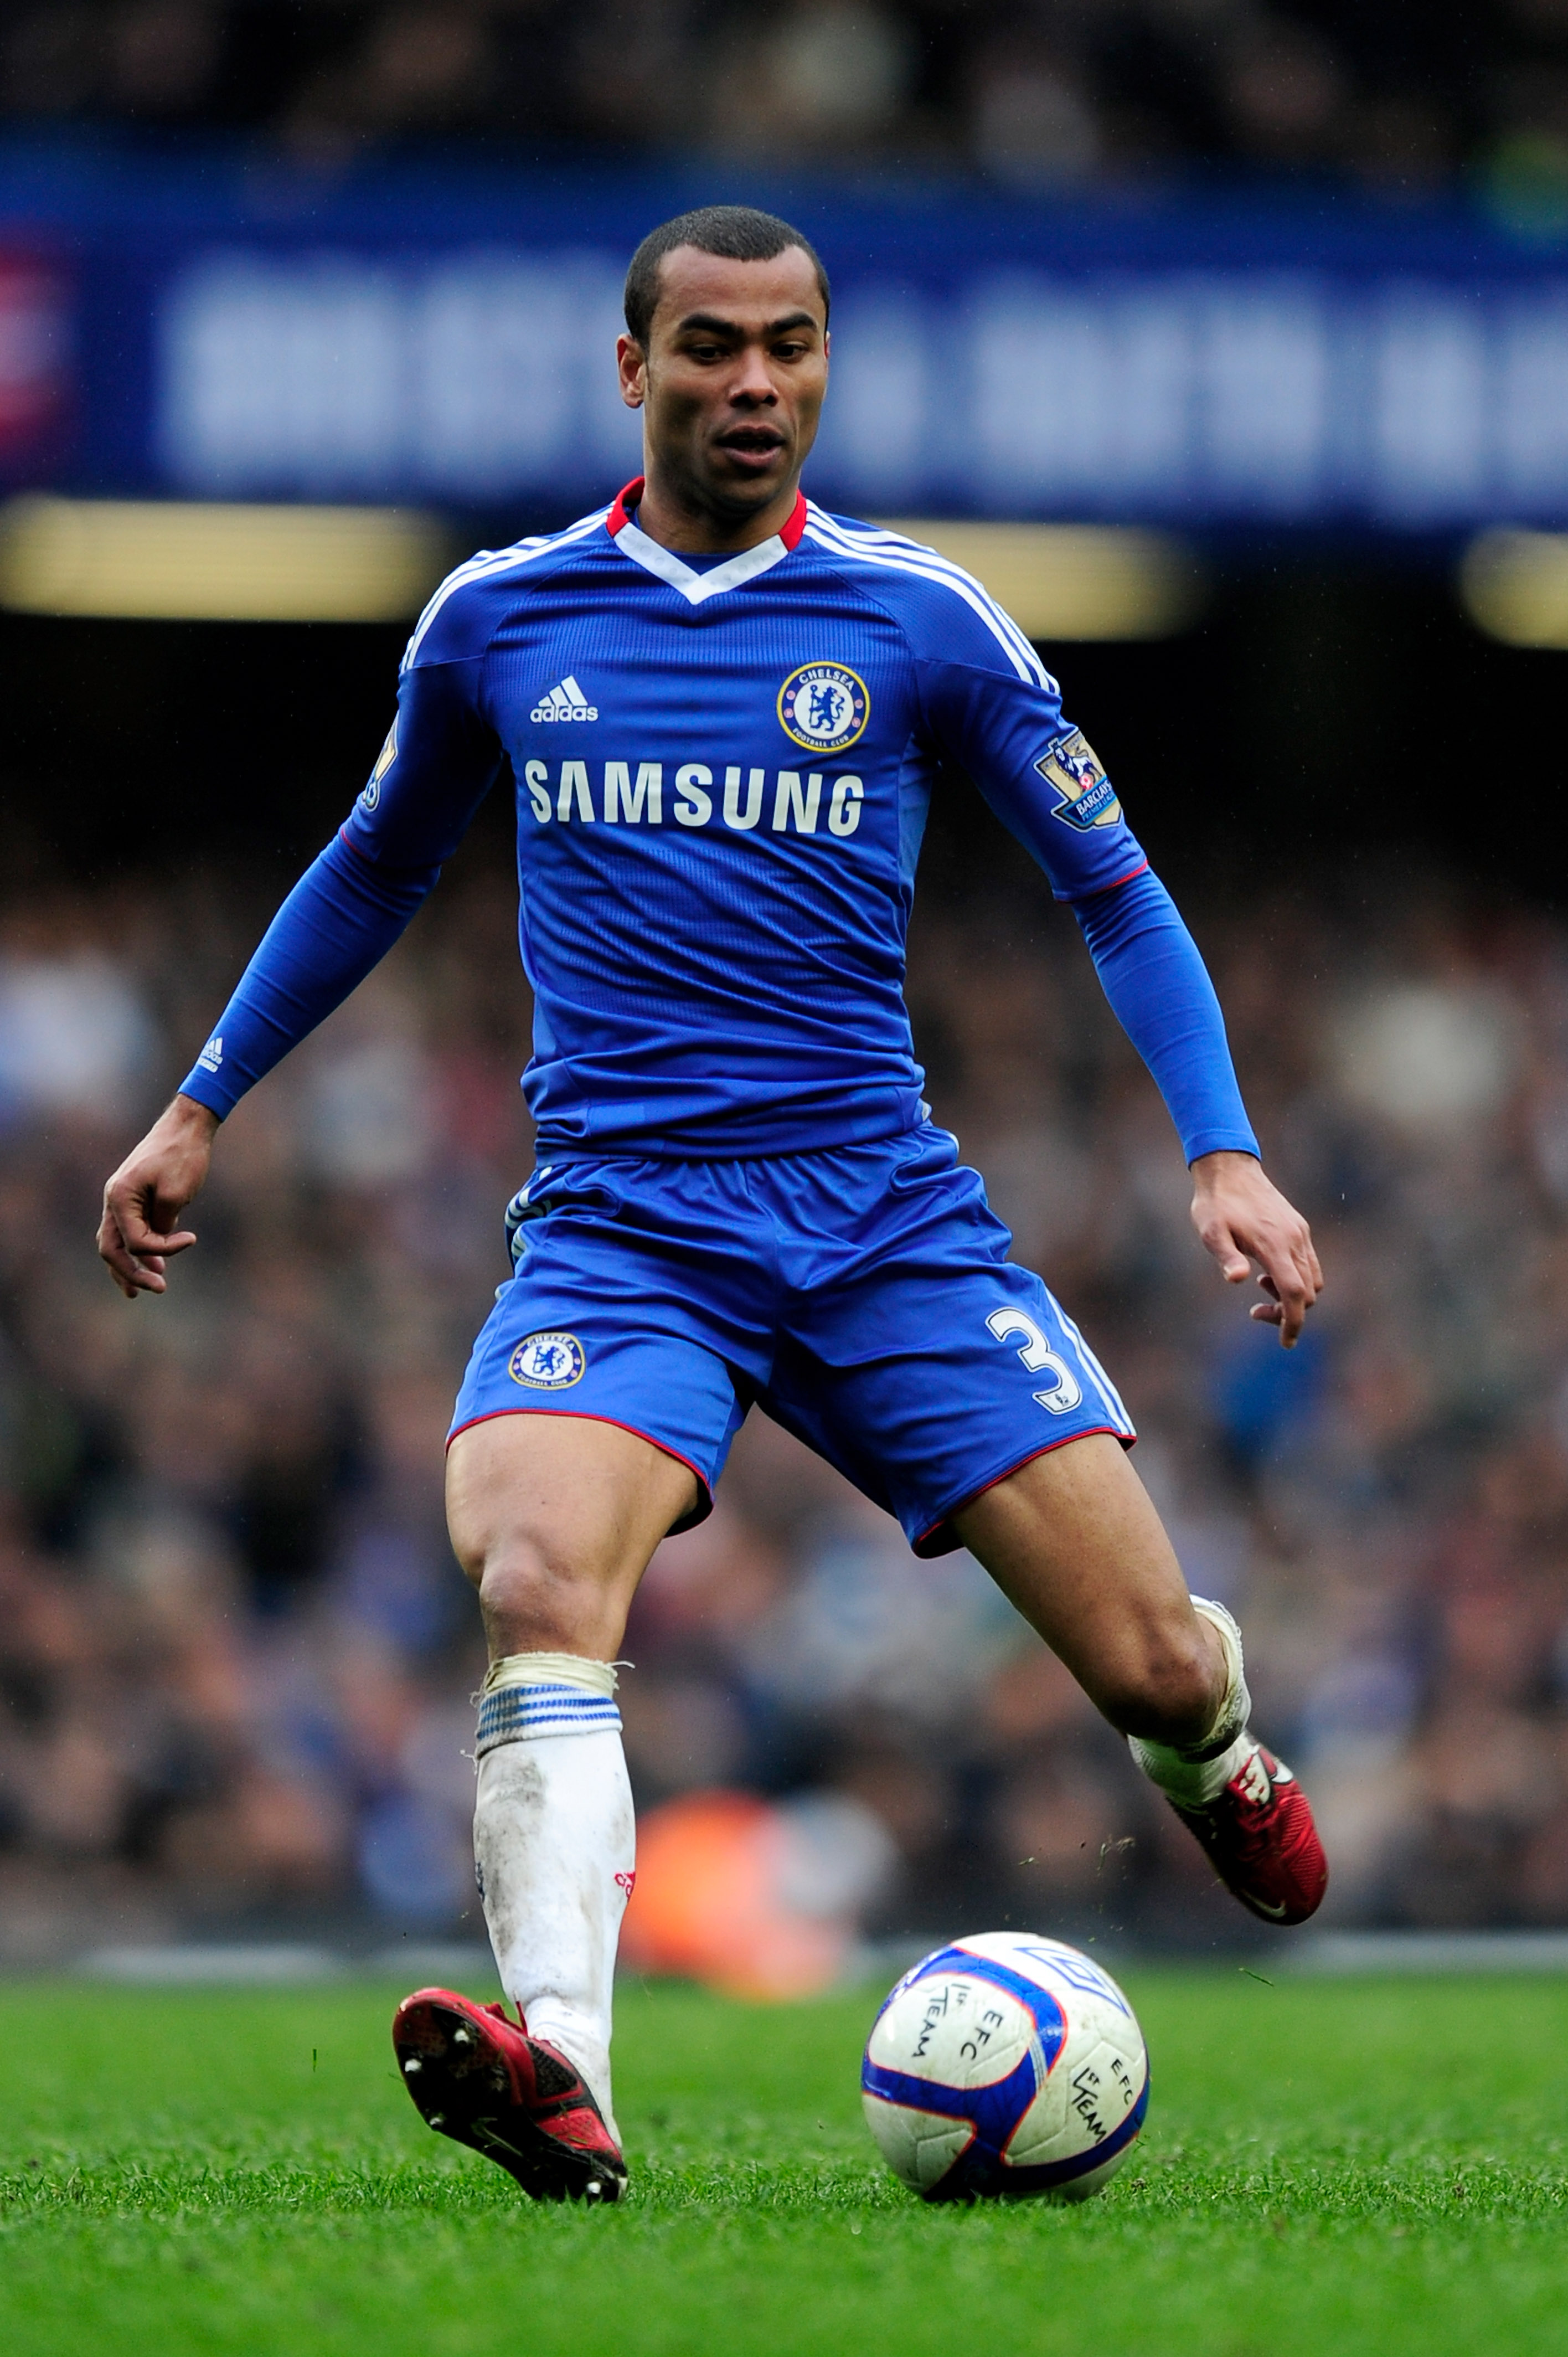 LONDON, ENGLAND - FEBRUARY 19:  Ashley Cole of Chelsea runs with the ball during the FA Cup sponsored by E.ON 4th round replay match between Chelsea and Everton at Stamford Bridge on February 19, 2011 in London, England.  (Photo by Jamie McDonald/Getty Im